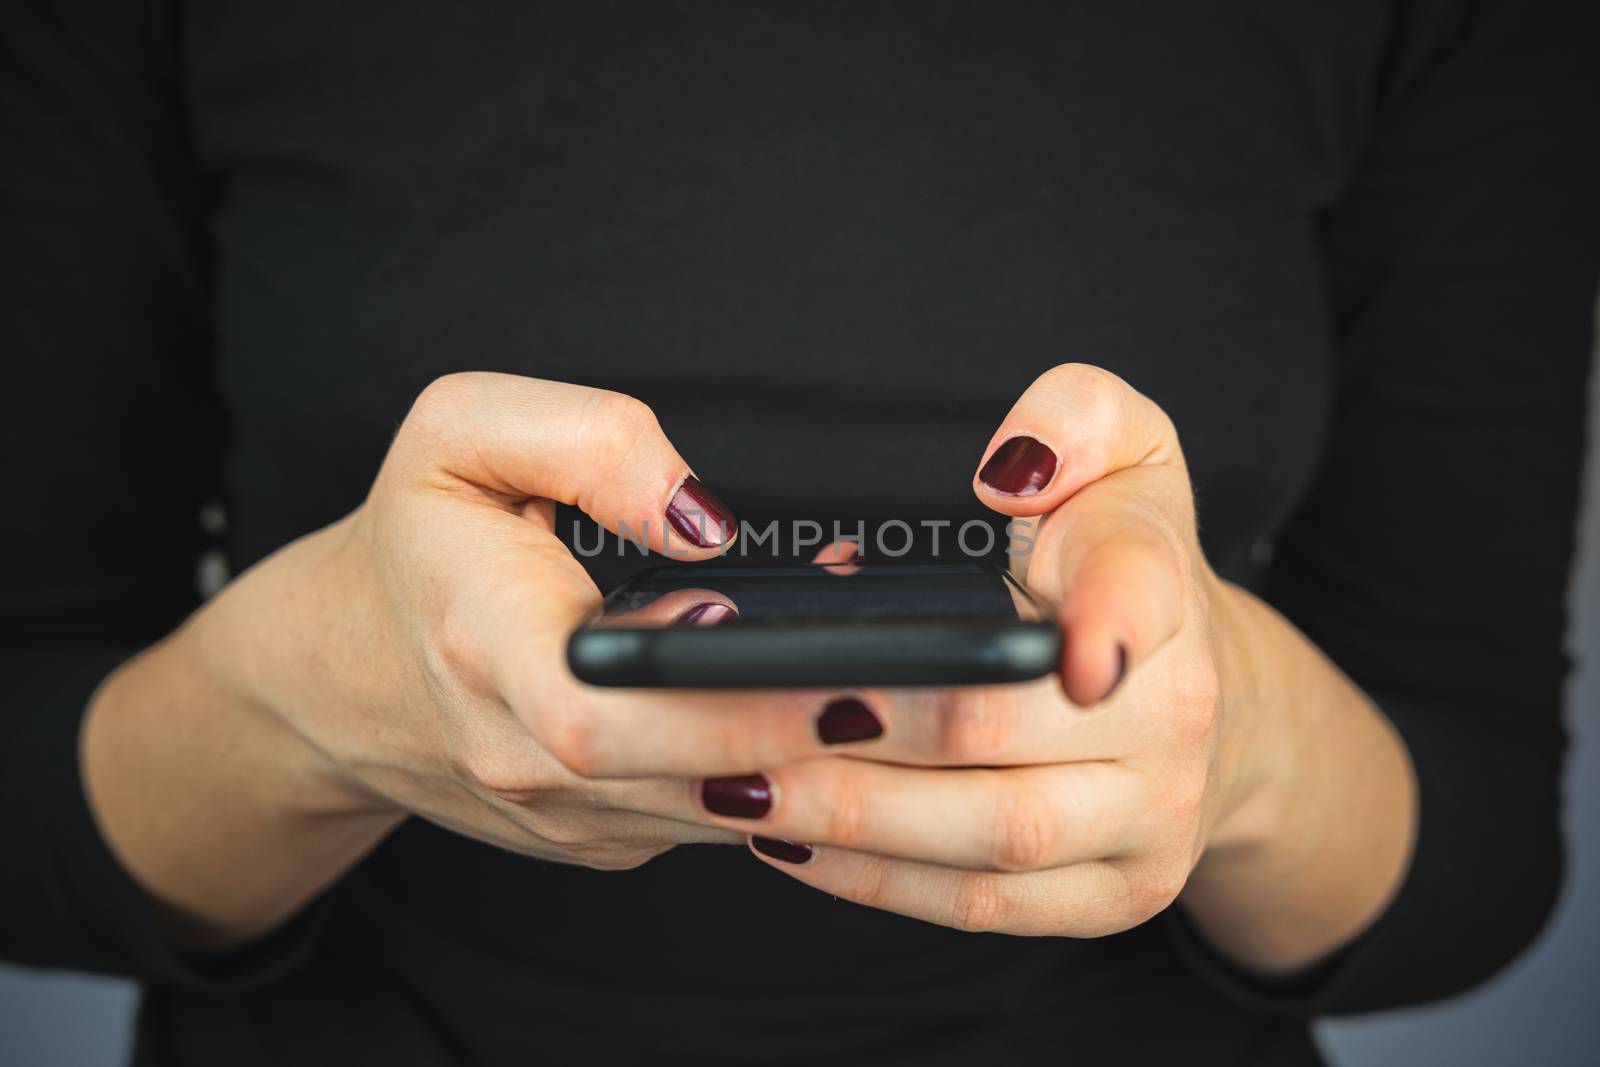 Texting on the phone, using smartphone. by photoboyko